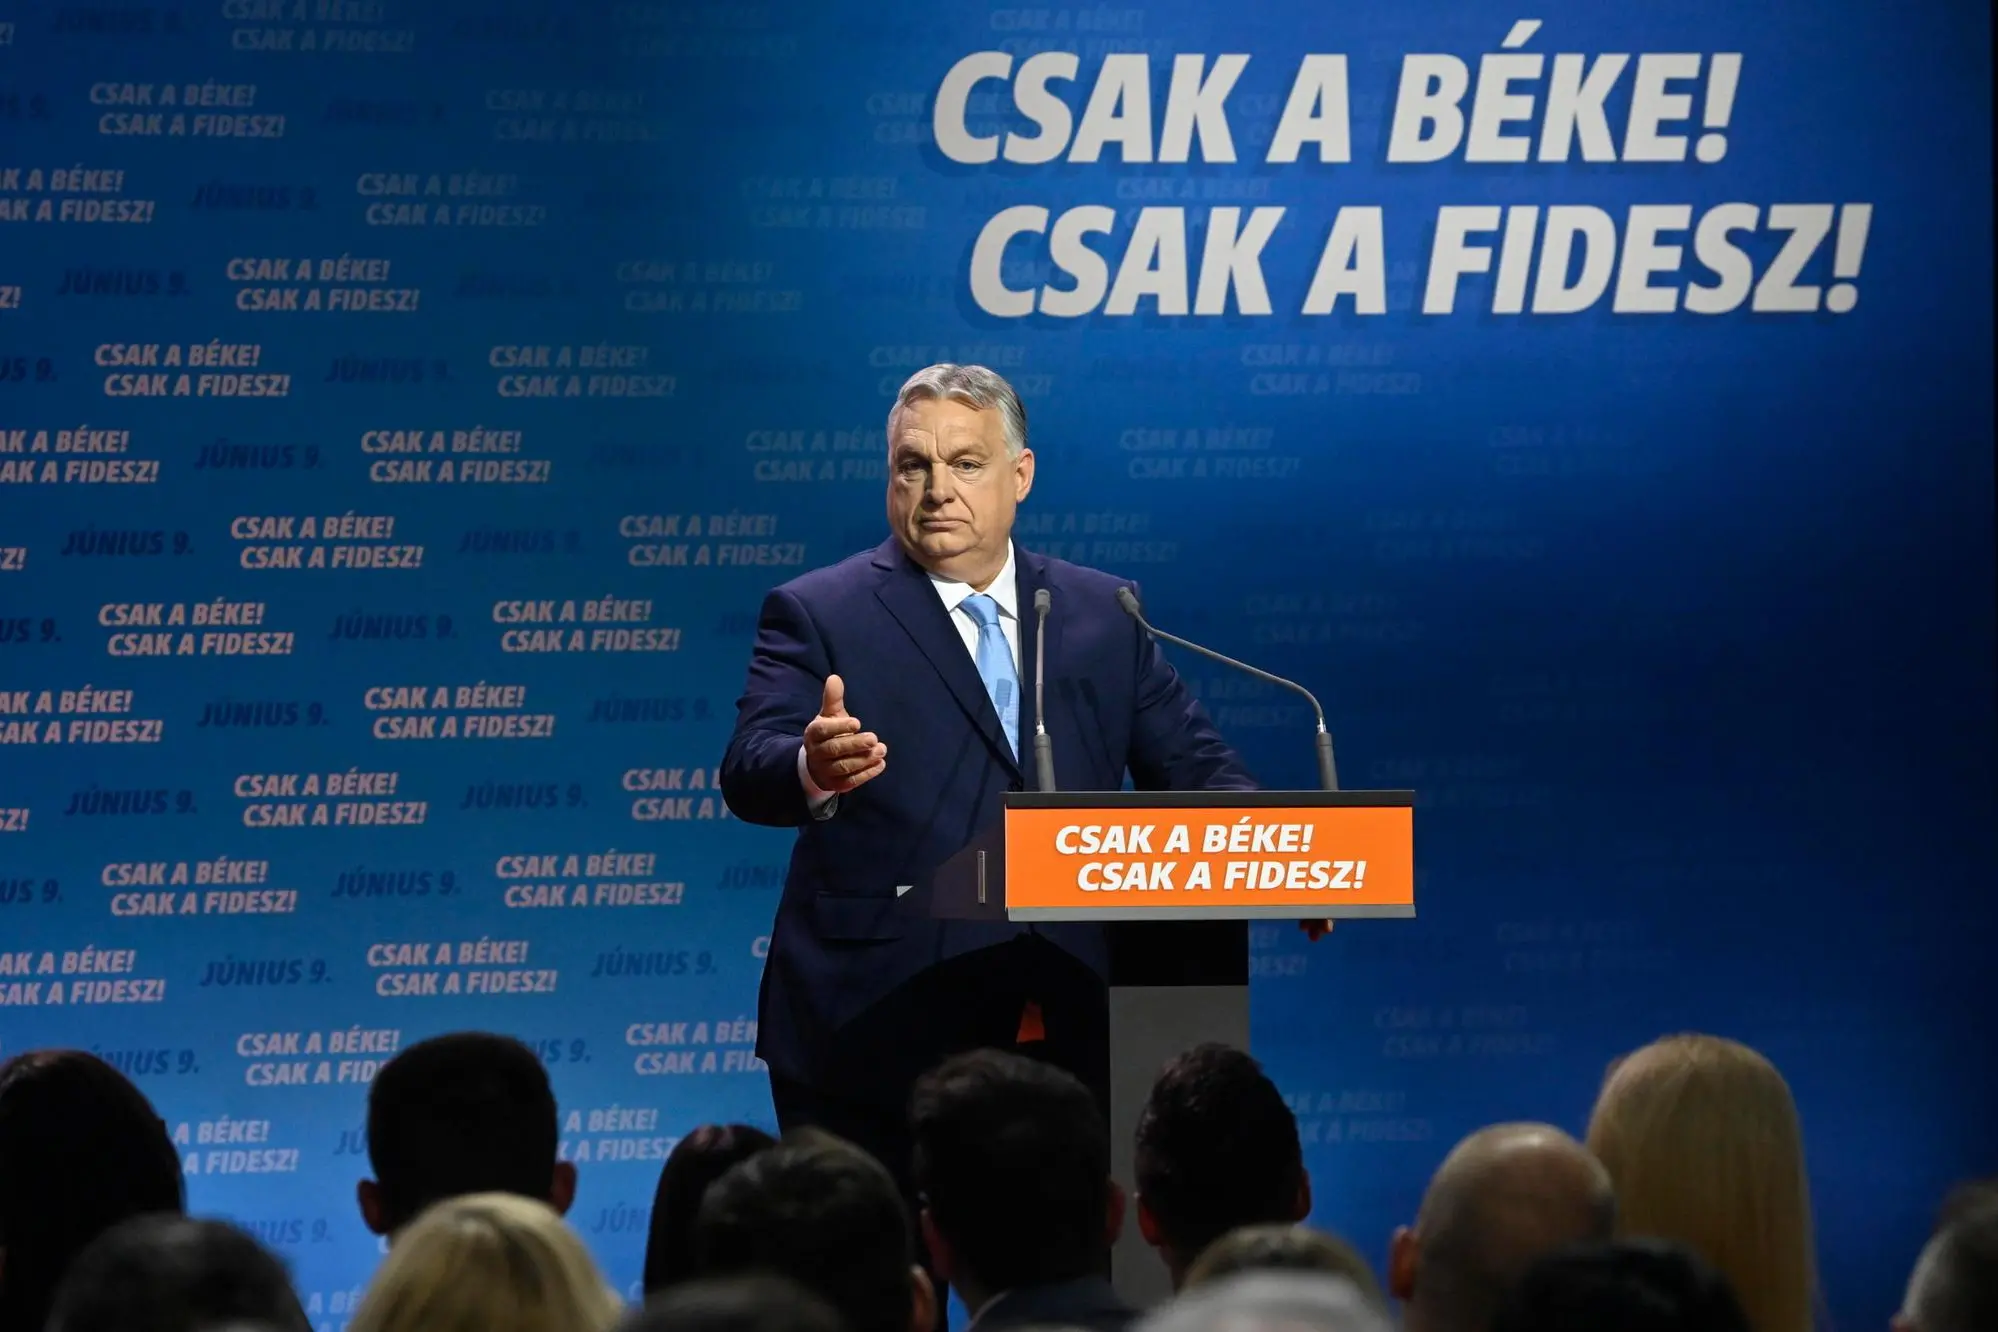 epa11288781 Hungarian Prime Minister and Chairman of Fidesz party Viktor Orban addresses a rally launching the campaign of the party for the European Parliamentary and the local elections in Budapest, Hungary, 19 April 2024. The inscription readPeace only! Fidesz only! EPA/Szilard Koszticsak HUNGARY OUT